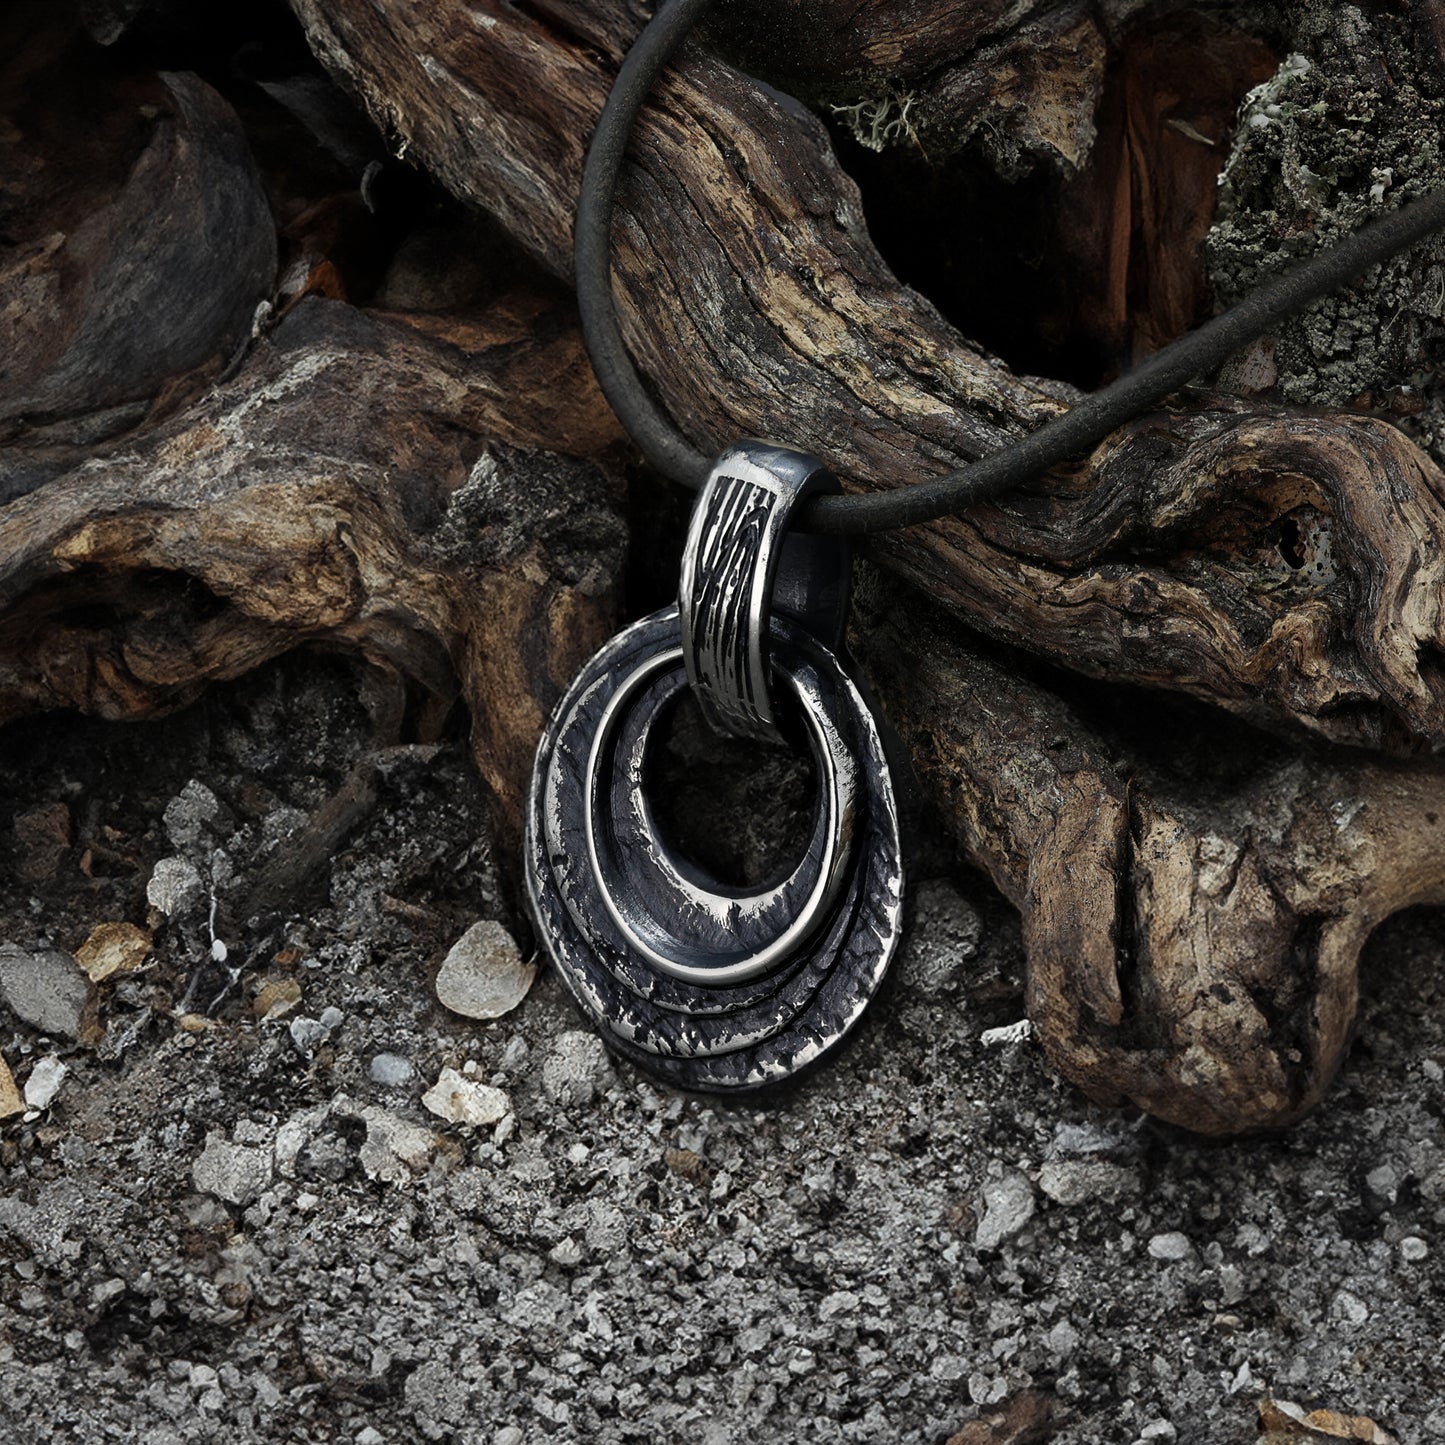 Rugged sterling silver pendant, embodying Viking and Pagan spirit, ready for online order.